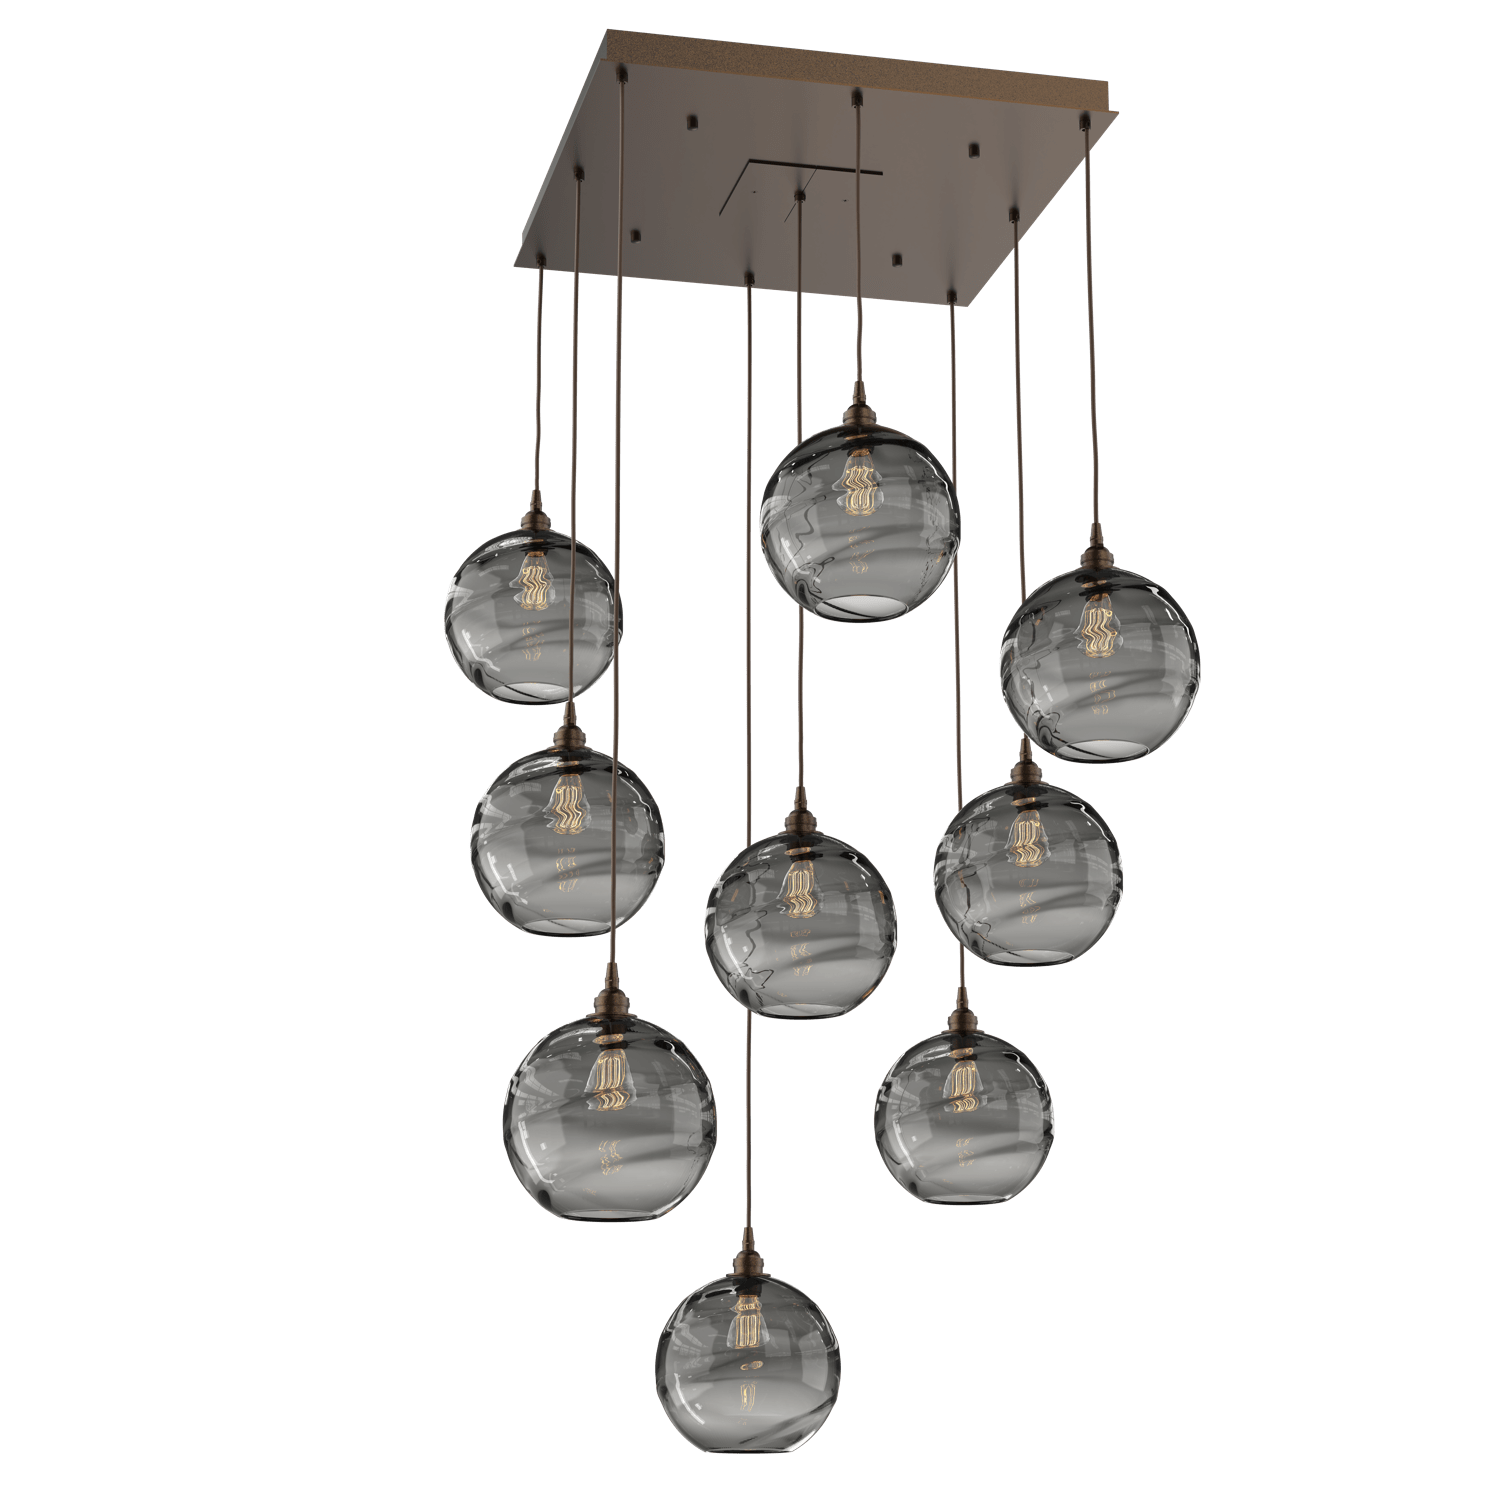 CHB0047-09-FB-OS-Hammerton-Studio-Optic-Blown-Glass-Terra-9-light-square-pendant-chandelier-with-flat-bronze-finish-and-optic-smoke-blown-glass-shades-and-incandescent-lamping